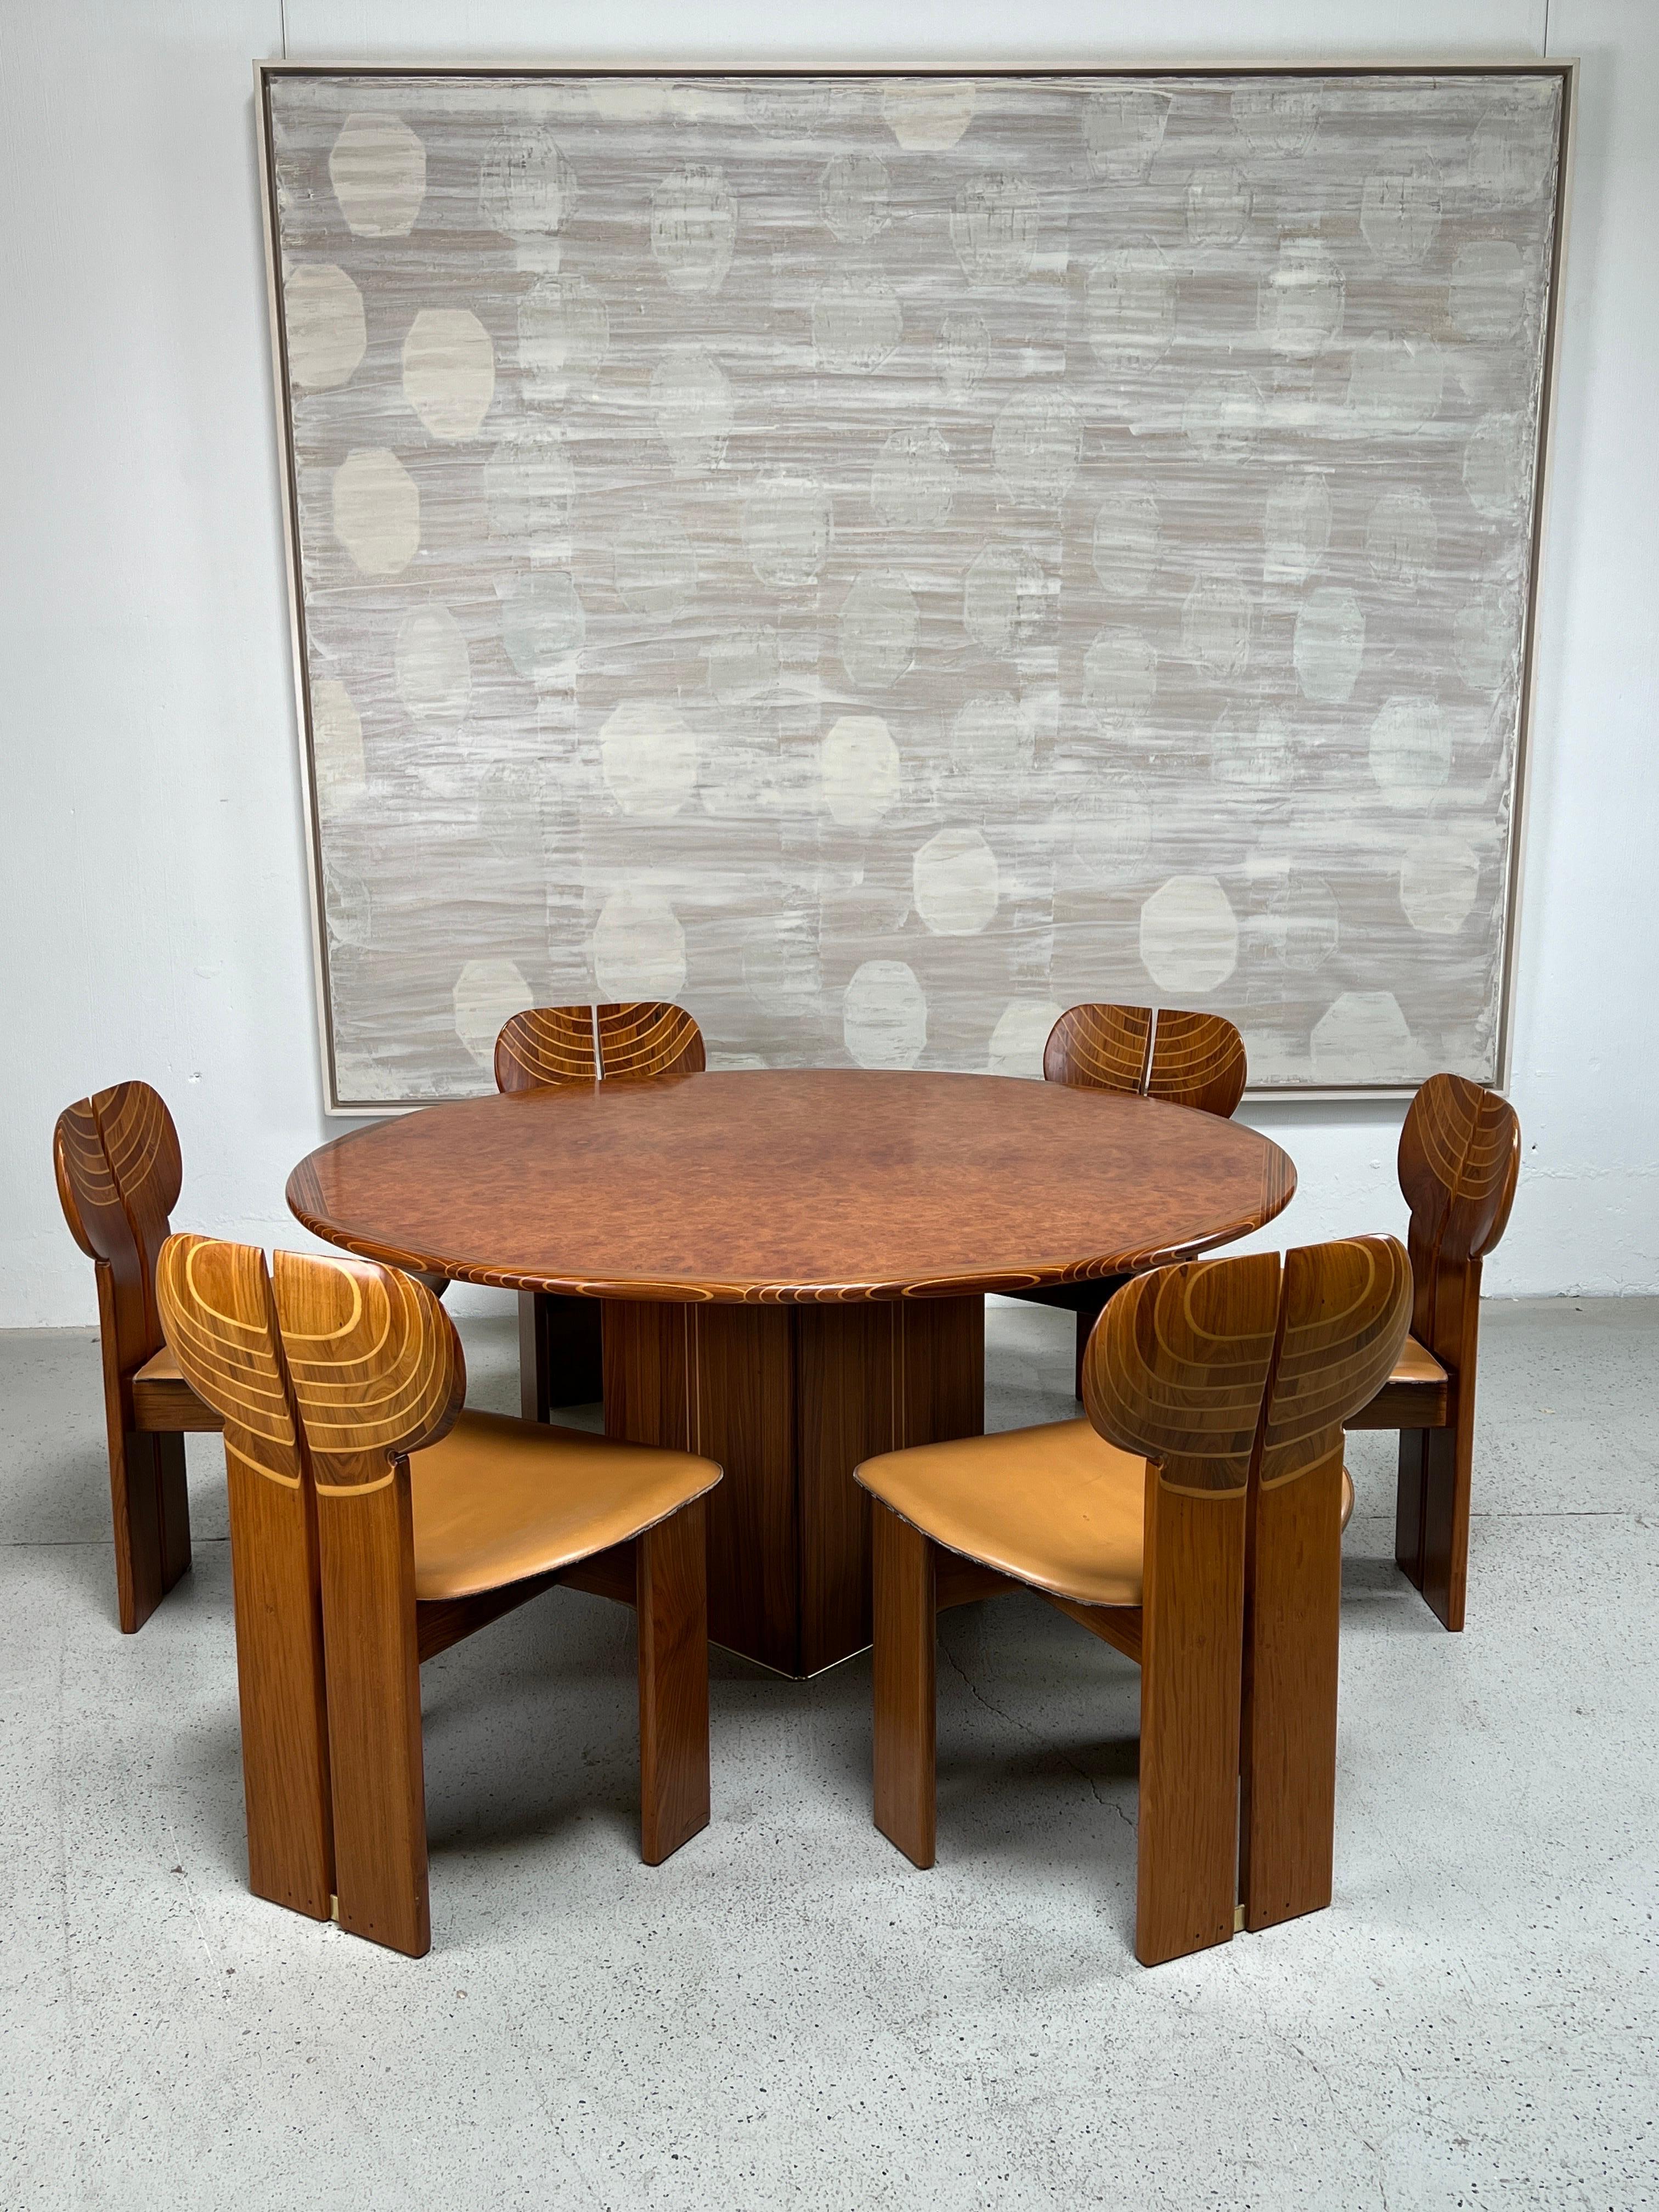 A beautifully detailed 'Artona' dining table designed by Afra and Tobia Scarpa for Maxalto. Burl top with inlay in rosewood, walnut and other exotic woods.  Matching chairs available separately. 